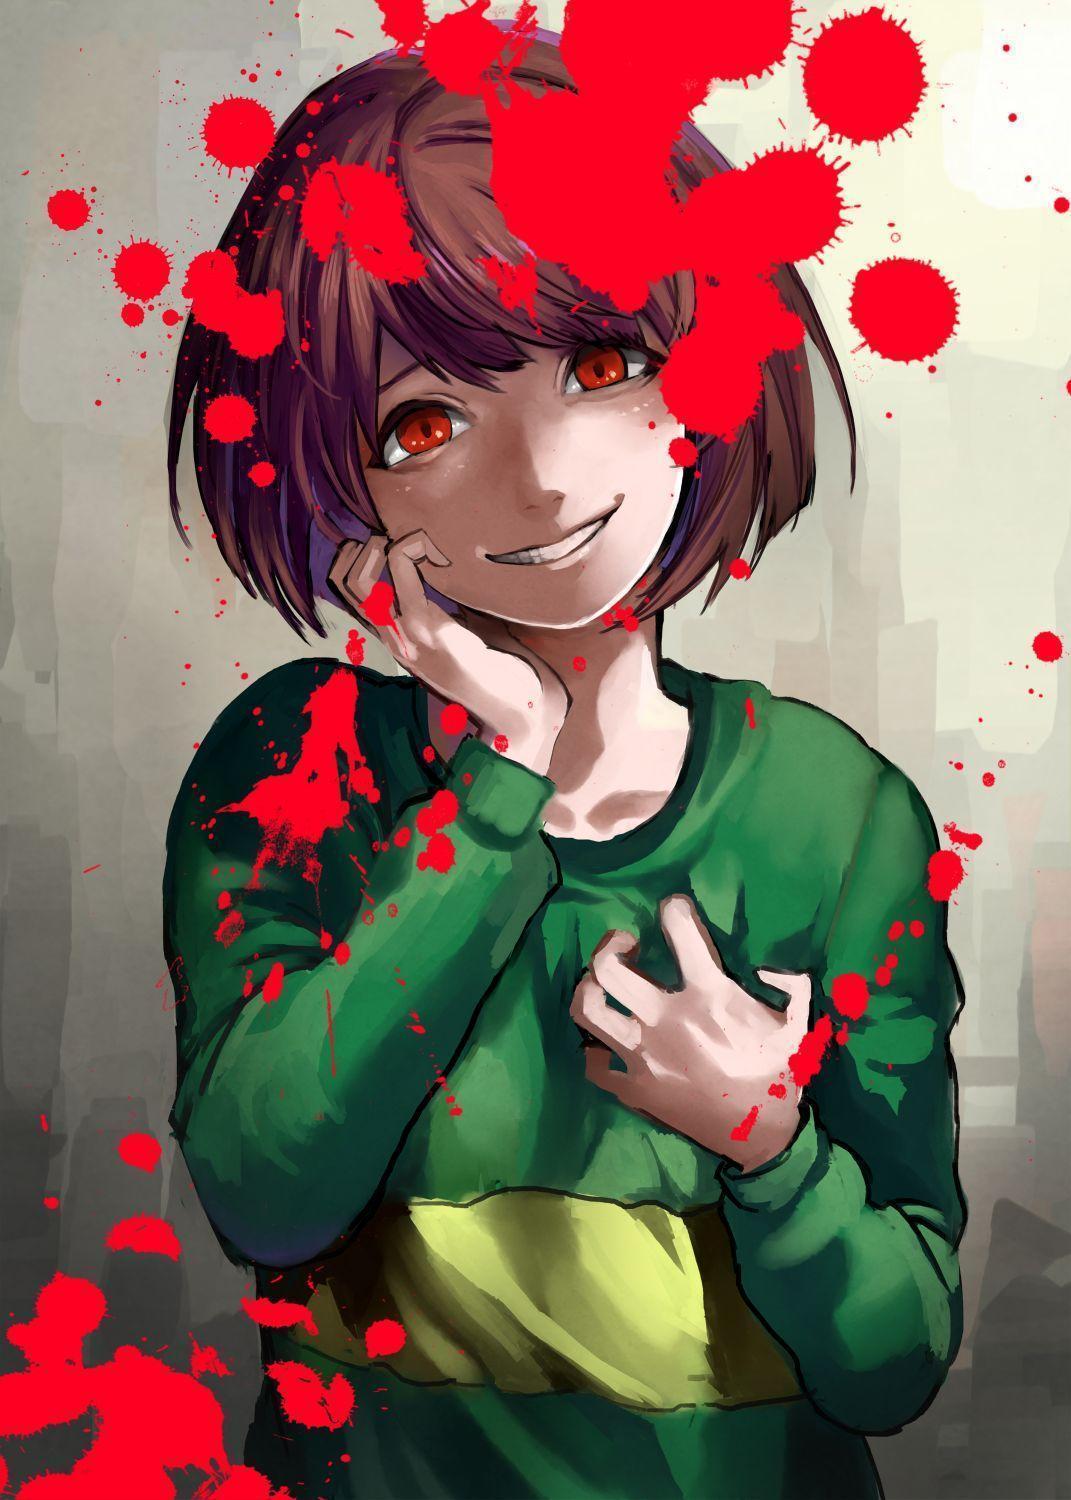 Chara Undertale Wallpapers - Wallpaper Cave